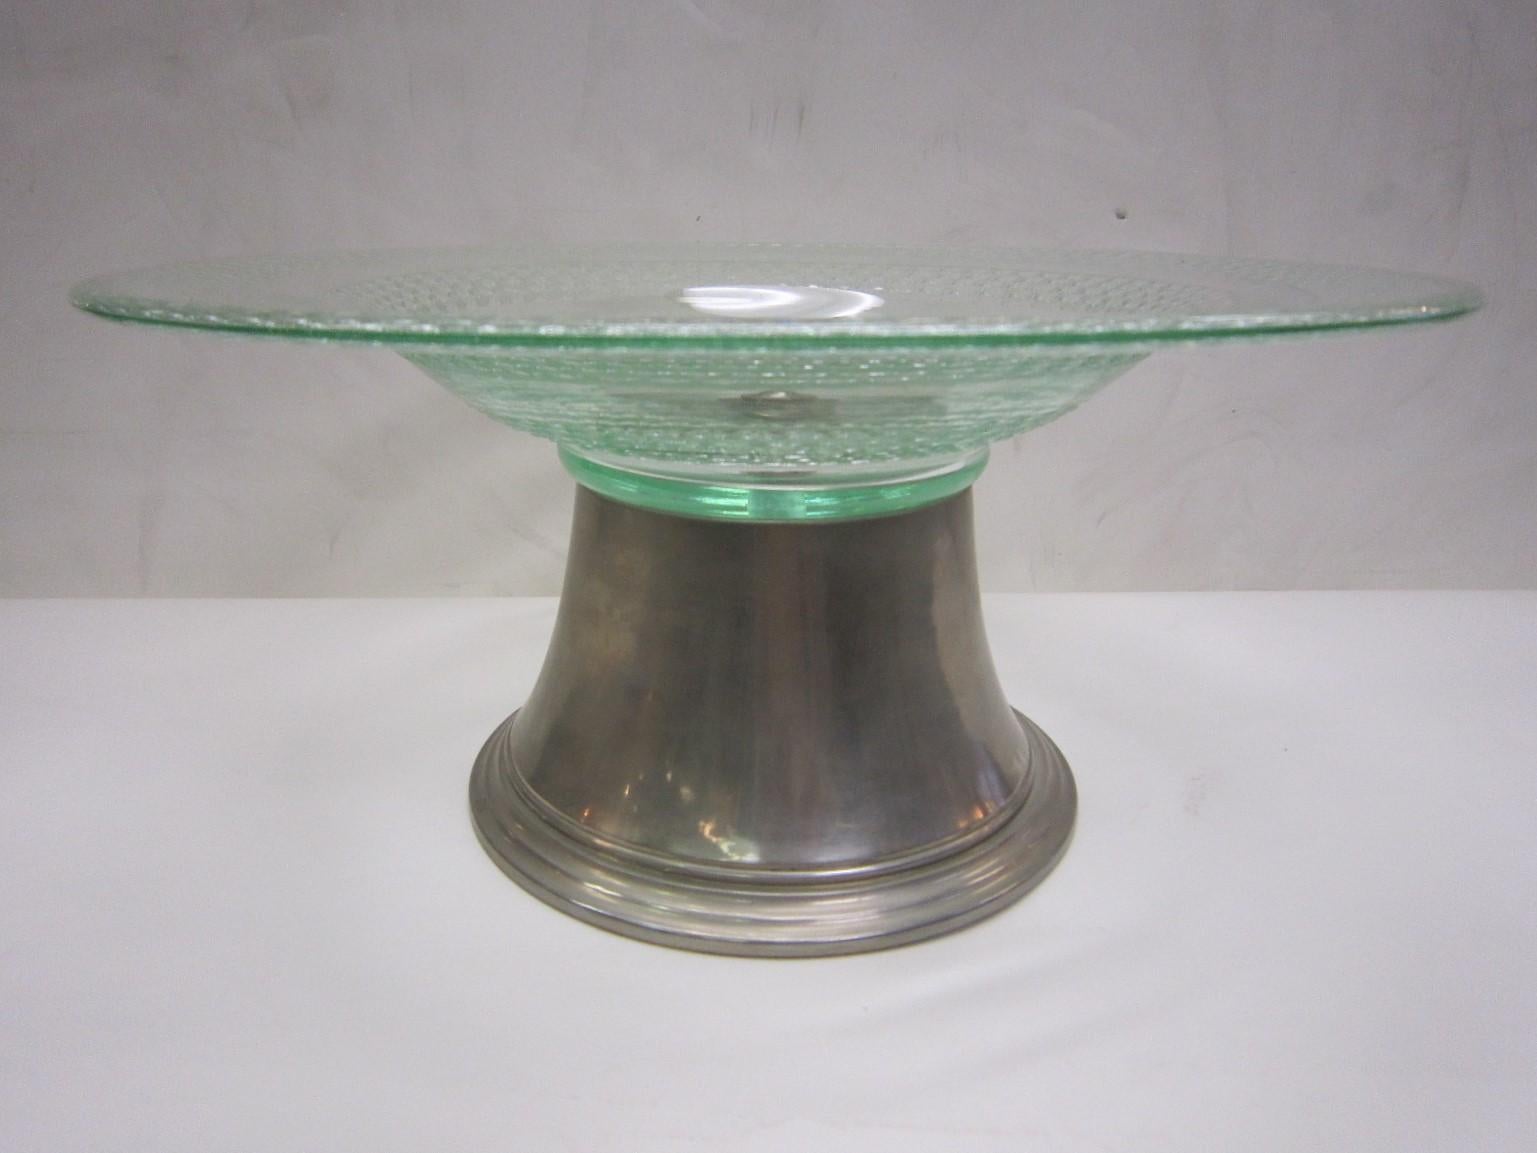 French Art Deco, Modernist acid etched art glass centerpiece, circa 1930, signed Daum Nancy.
Rings of rippled patterns grace this very slightly tinted emerald, spring green art glass coupe. The glass sits atop a sleek polished nickelled bronze